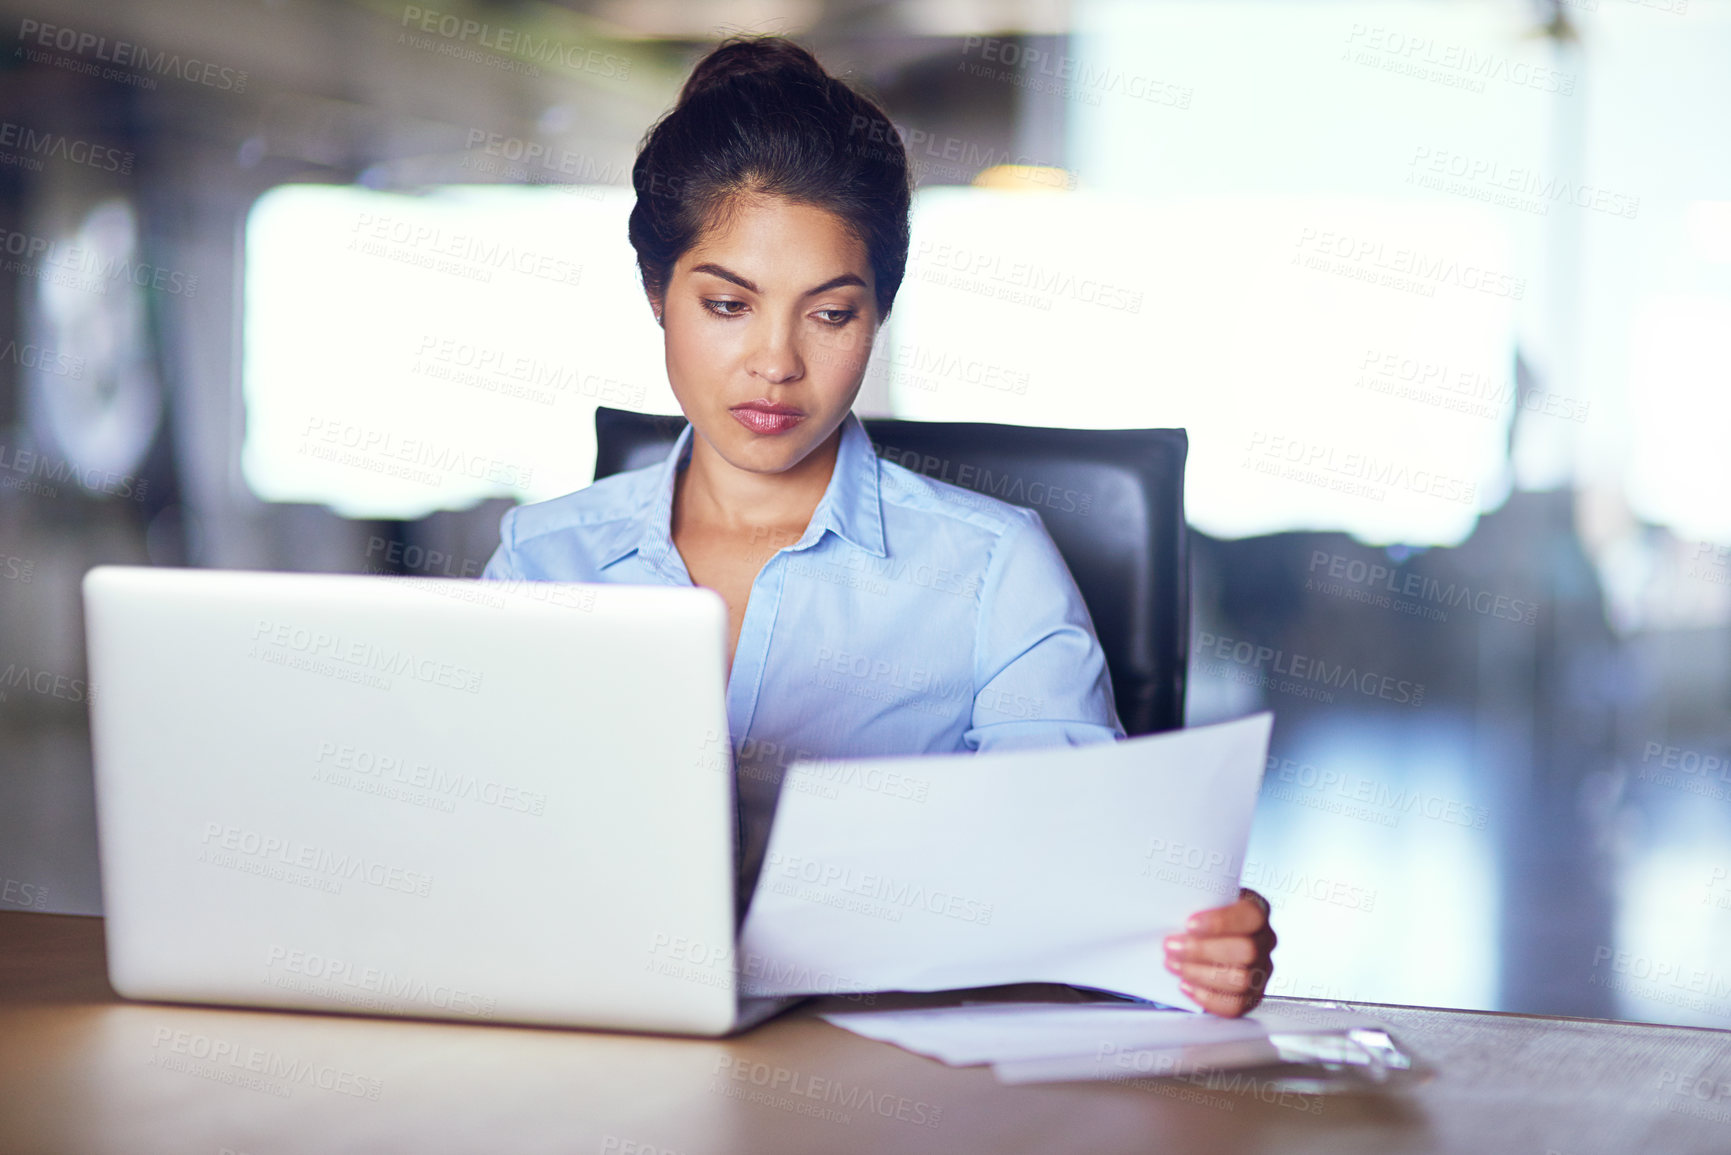 Buy stock photo Shot of a young businesswoman going over documents while working on her laptop